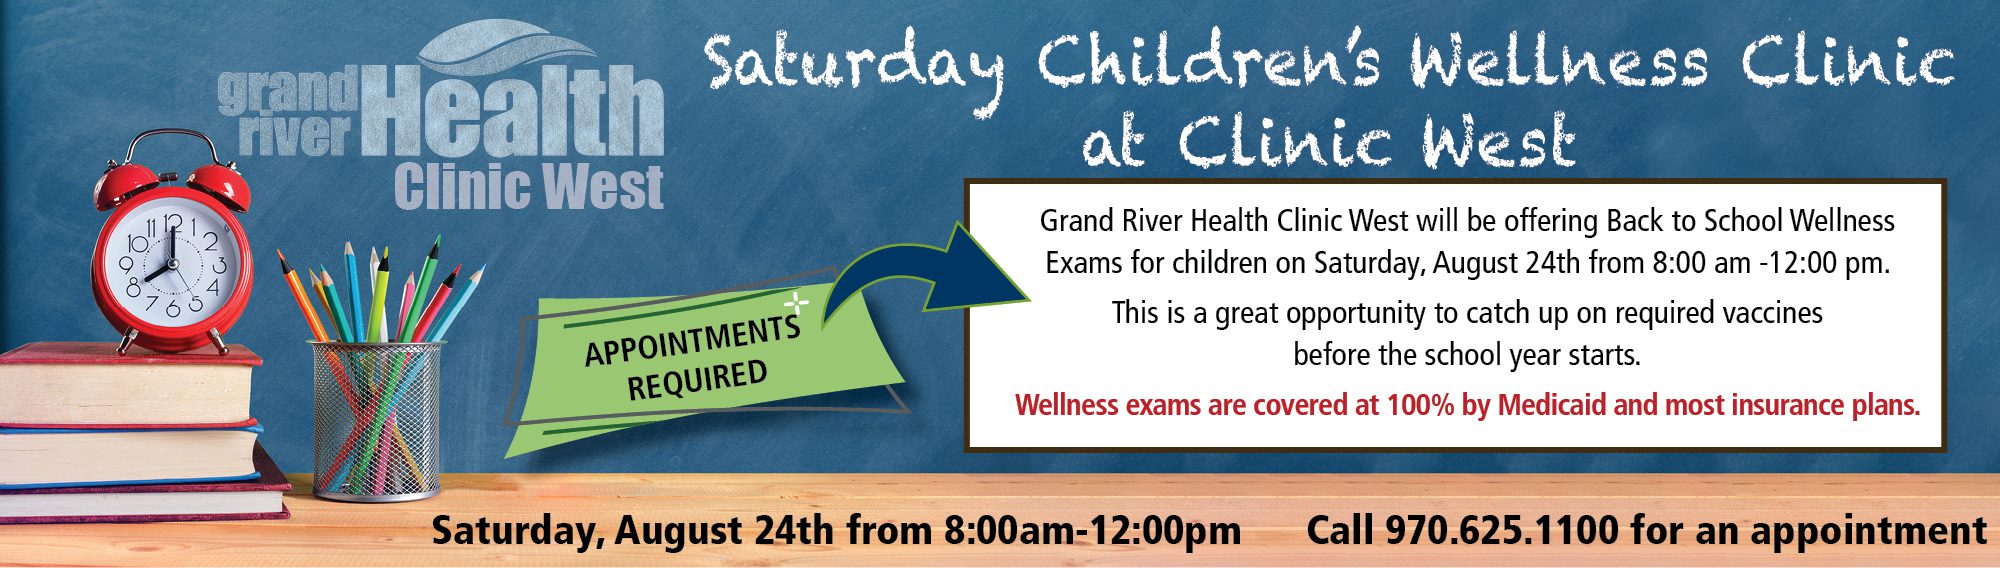 Saturday Children’s Wellness Clinic at Clinic West